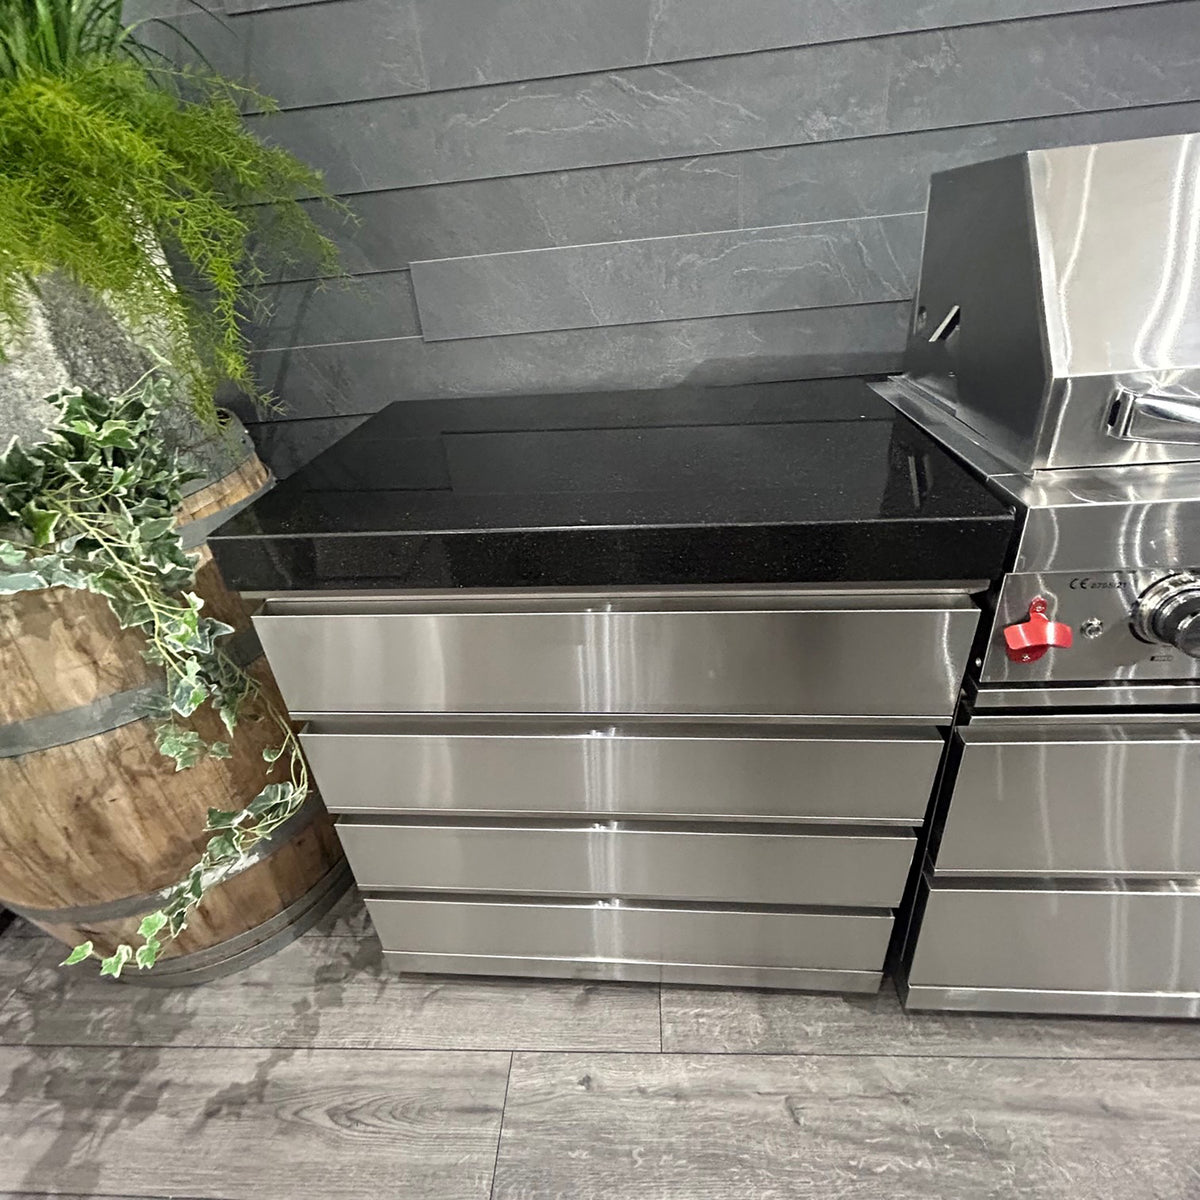 Ex Display Draco Grills 6 Burner Stainless Steel Outdoor Kitchen with 4 Drawer Unit and Single Fridge Unit